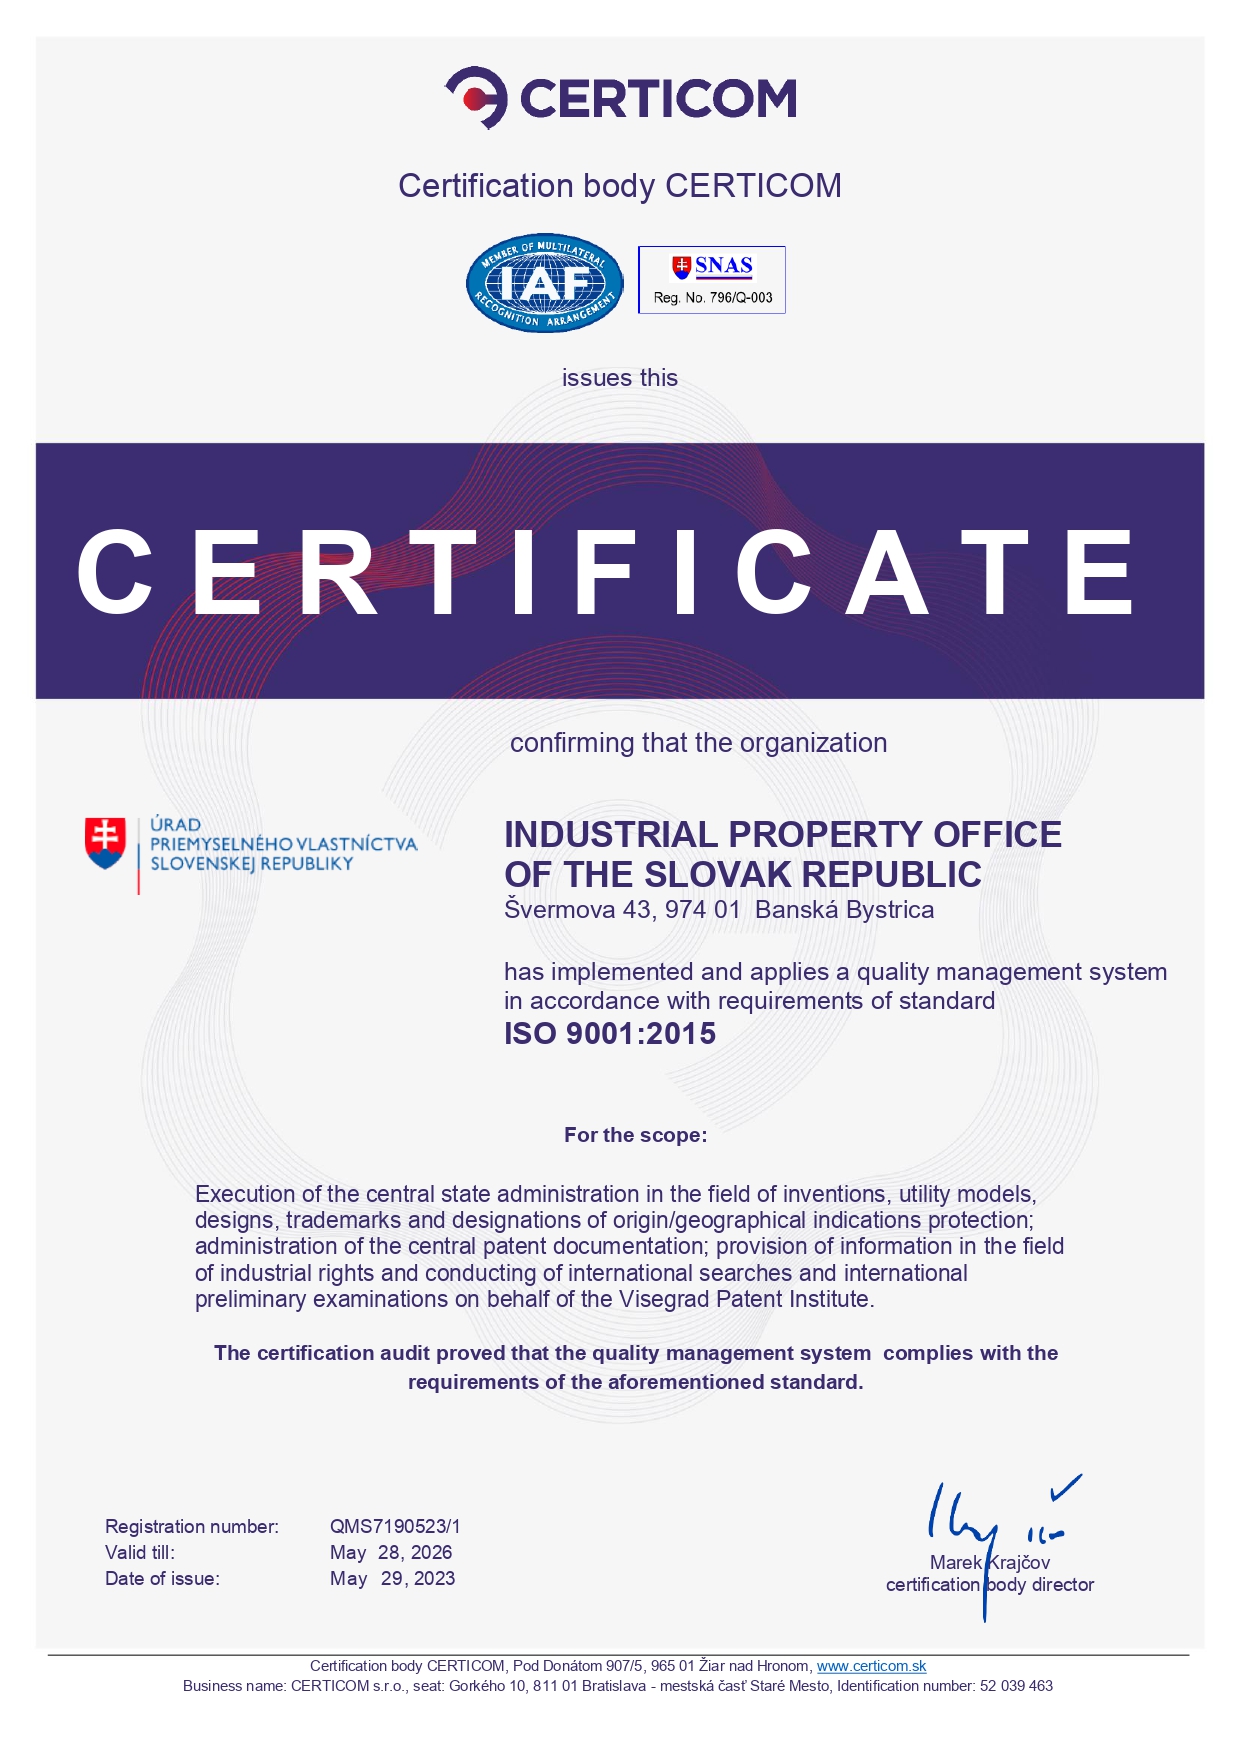 Certificate of a Quality Management System ISO 9001:2000